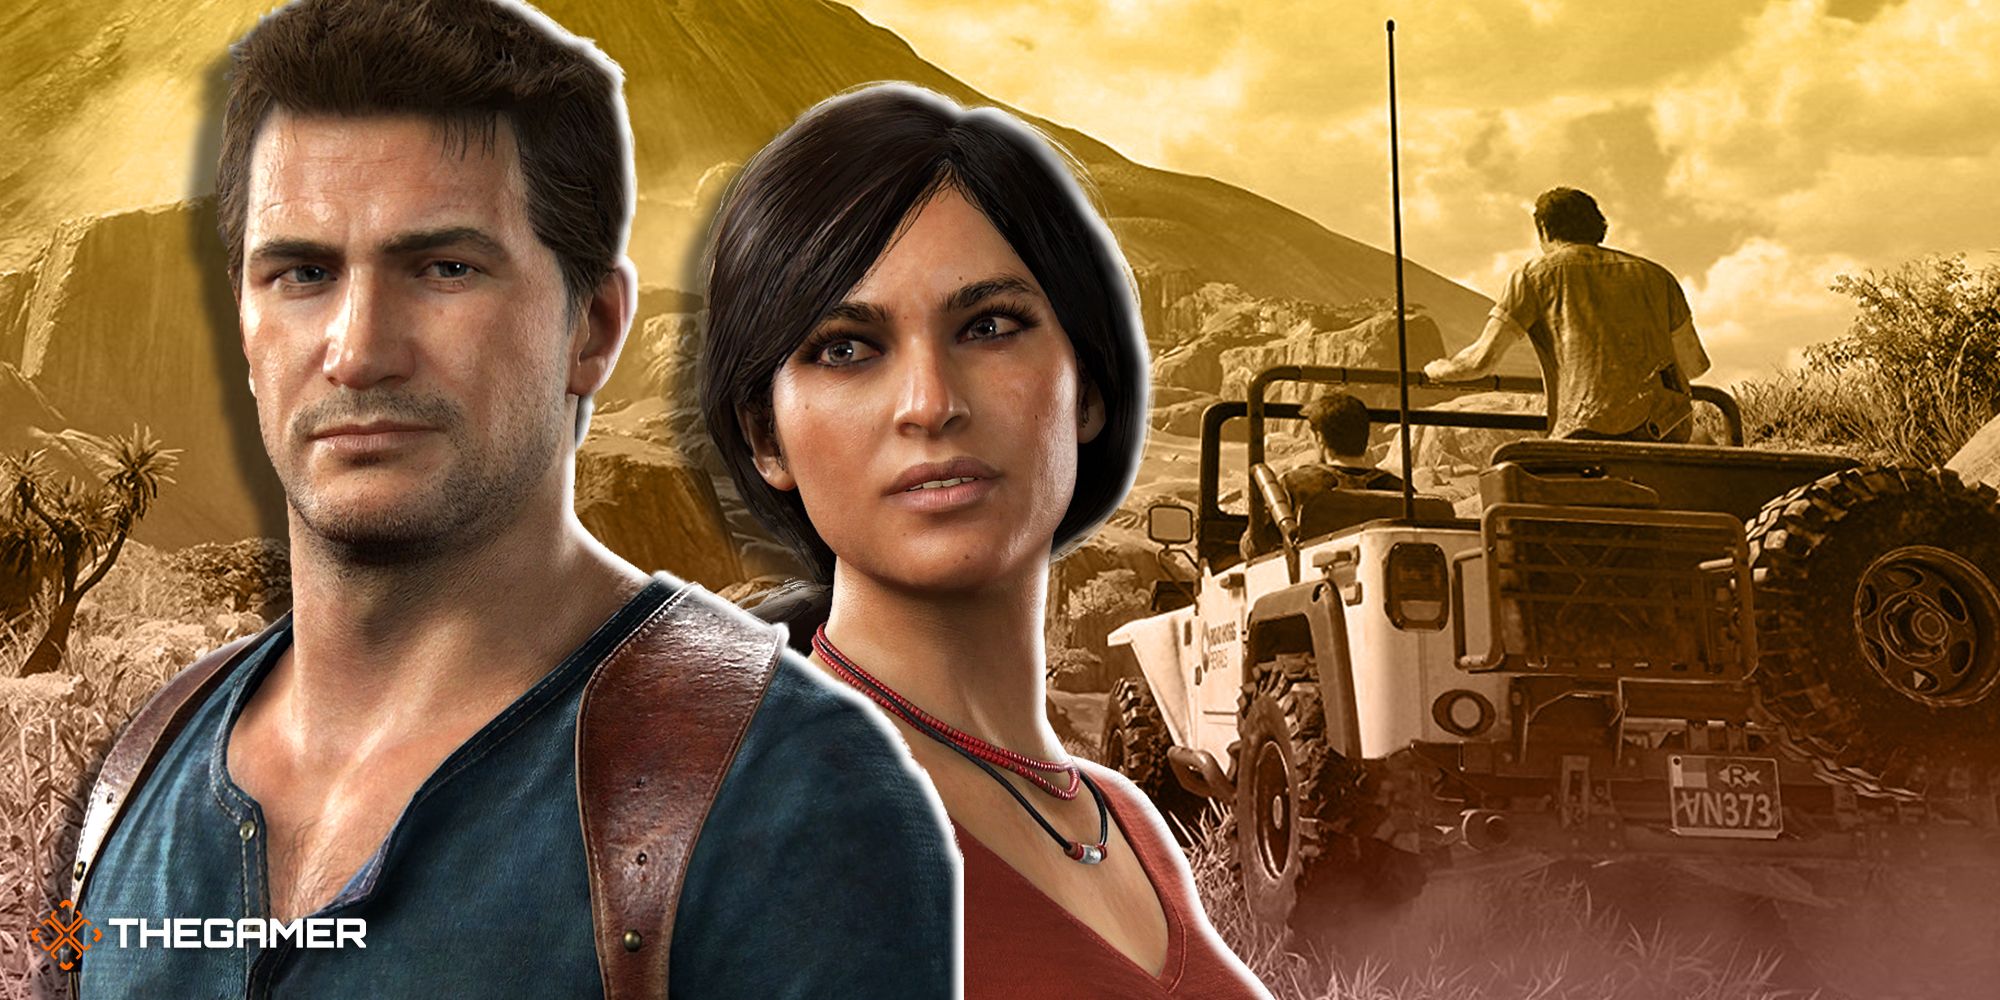 Nathan Drake and Chloe Frazer with a level from Uncharted 4 in the background